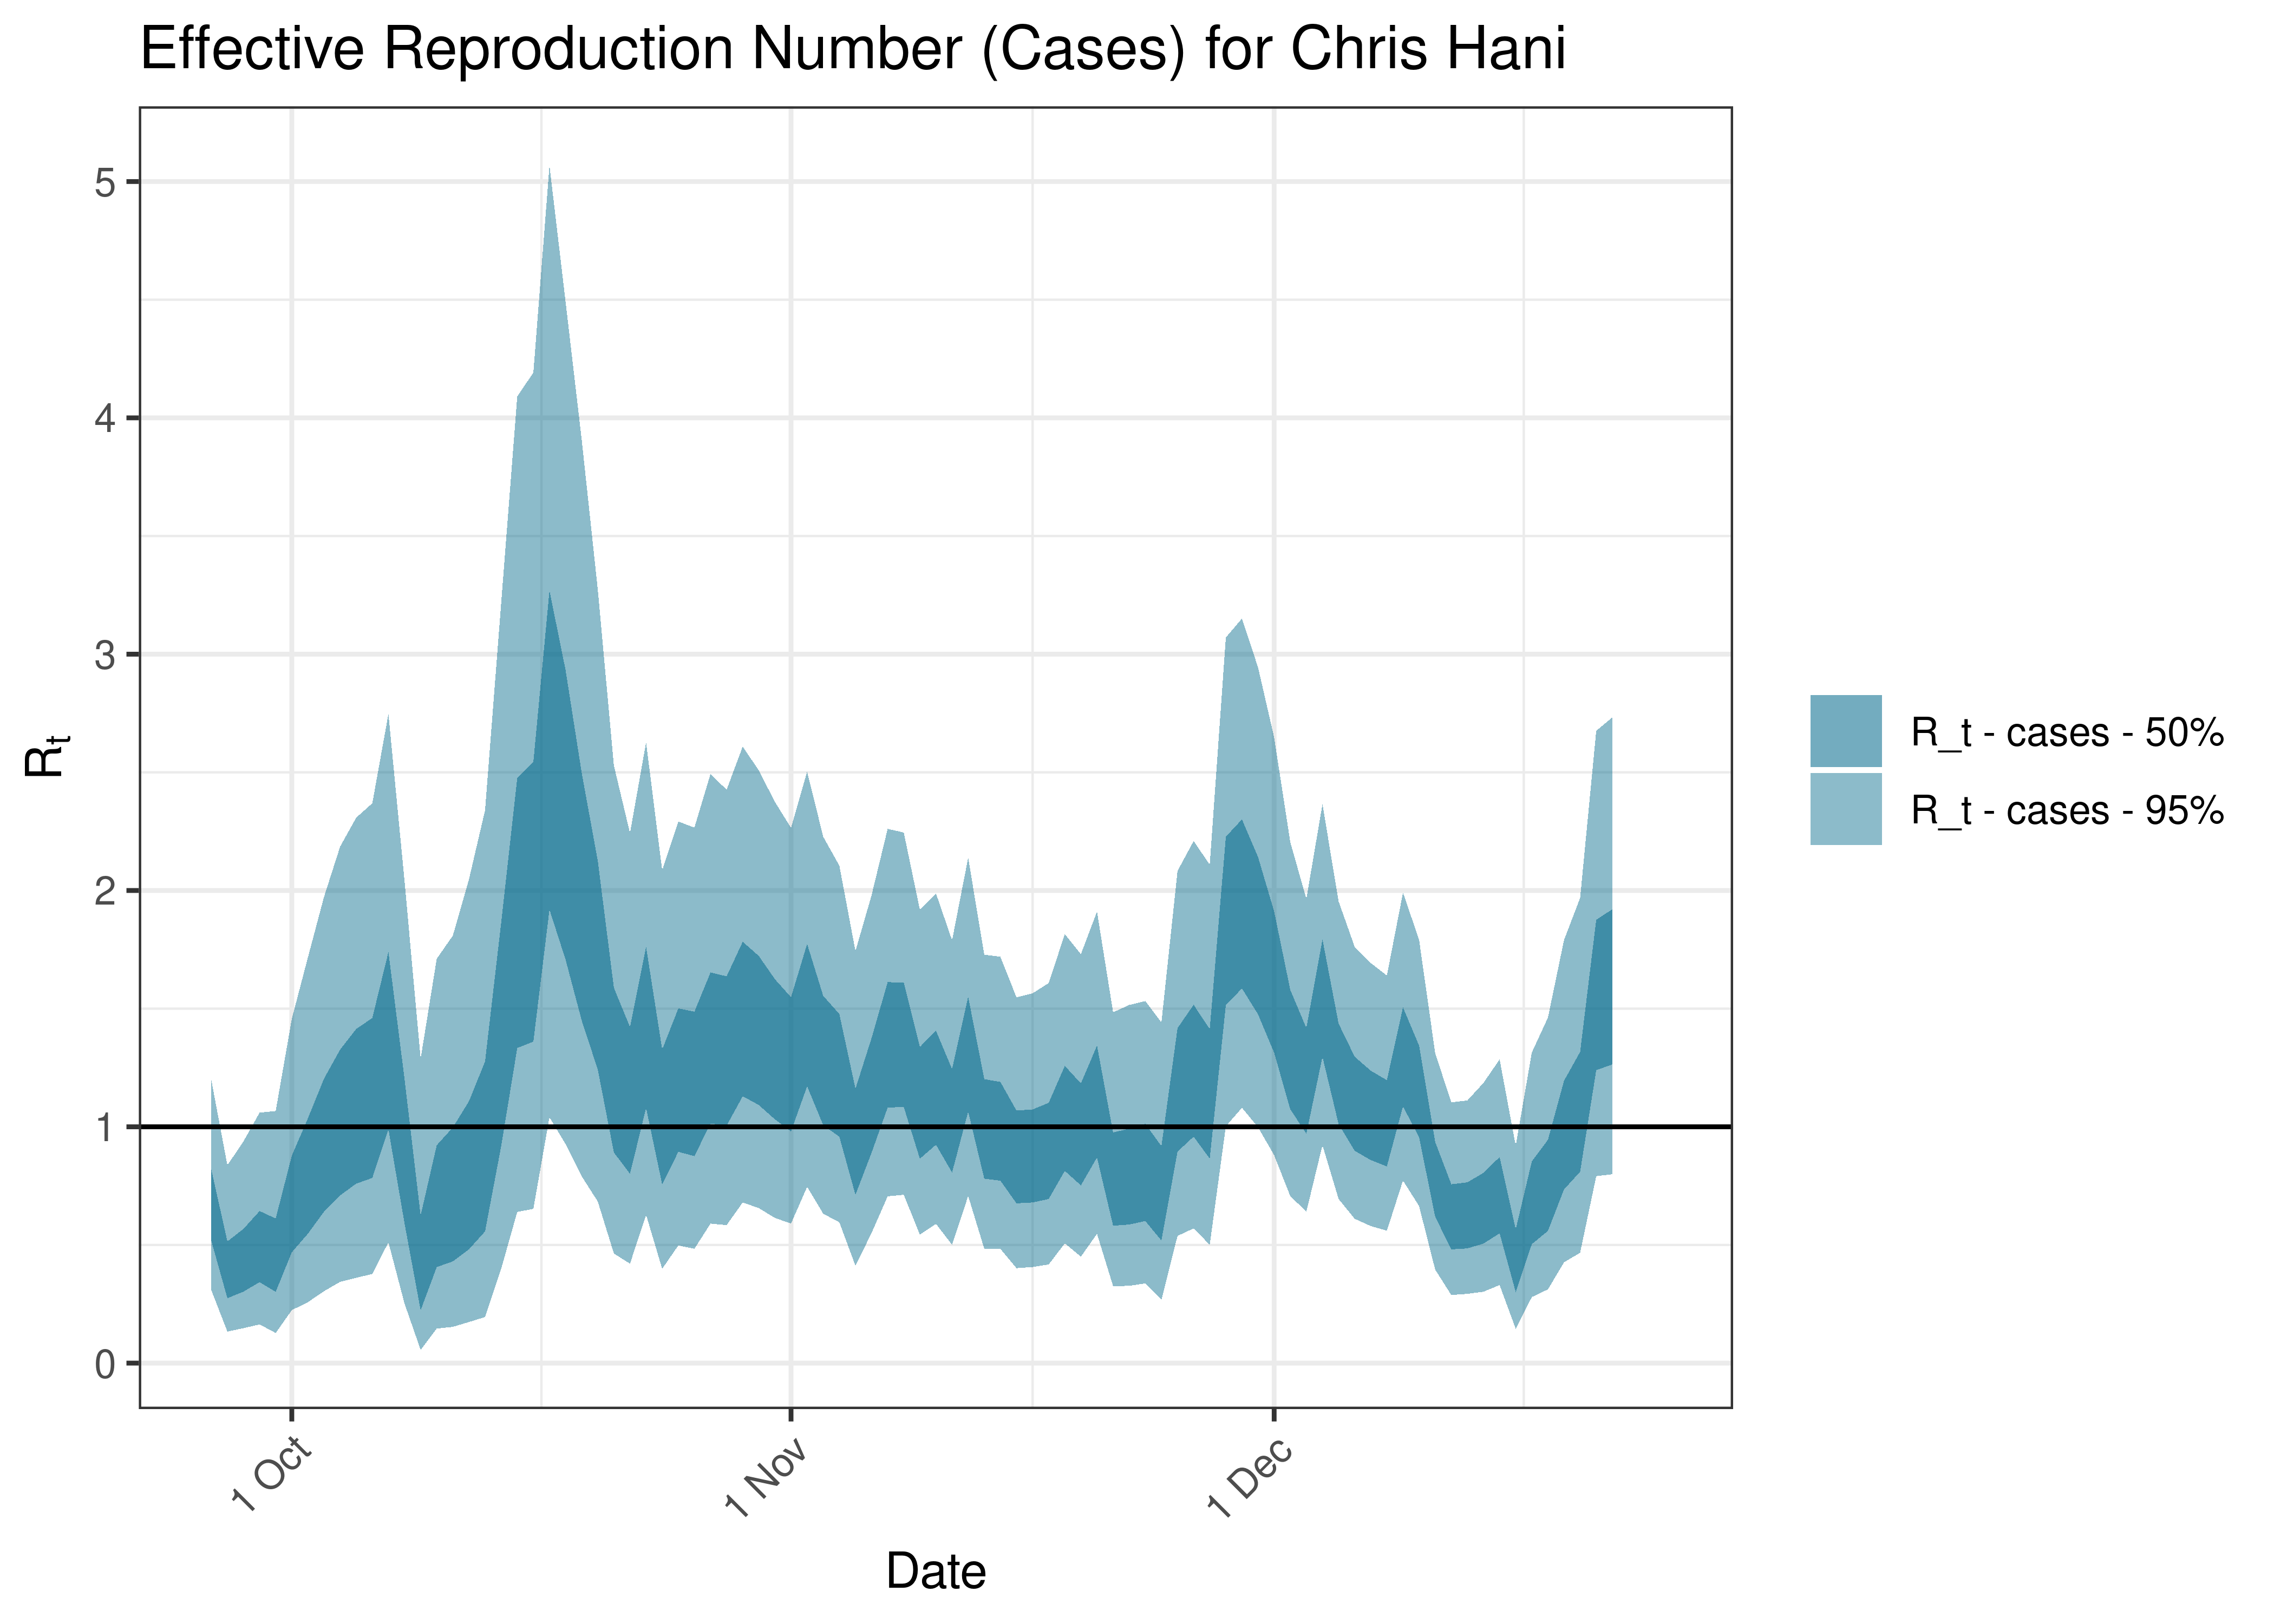 Estimated Effective Reproduction Number Based on Cases for Chris Hani over last 90 days